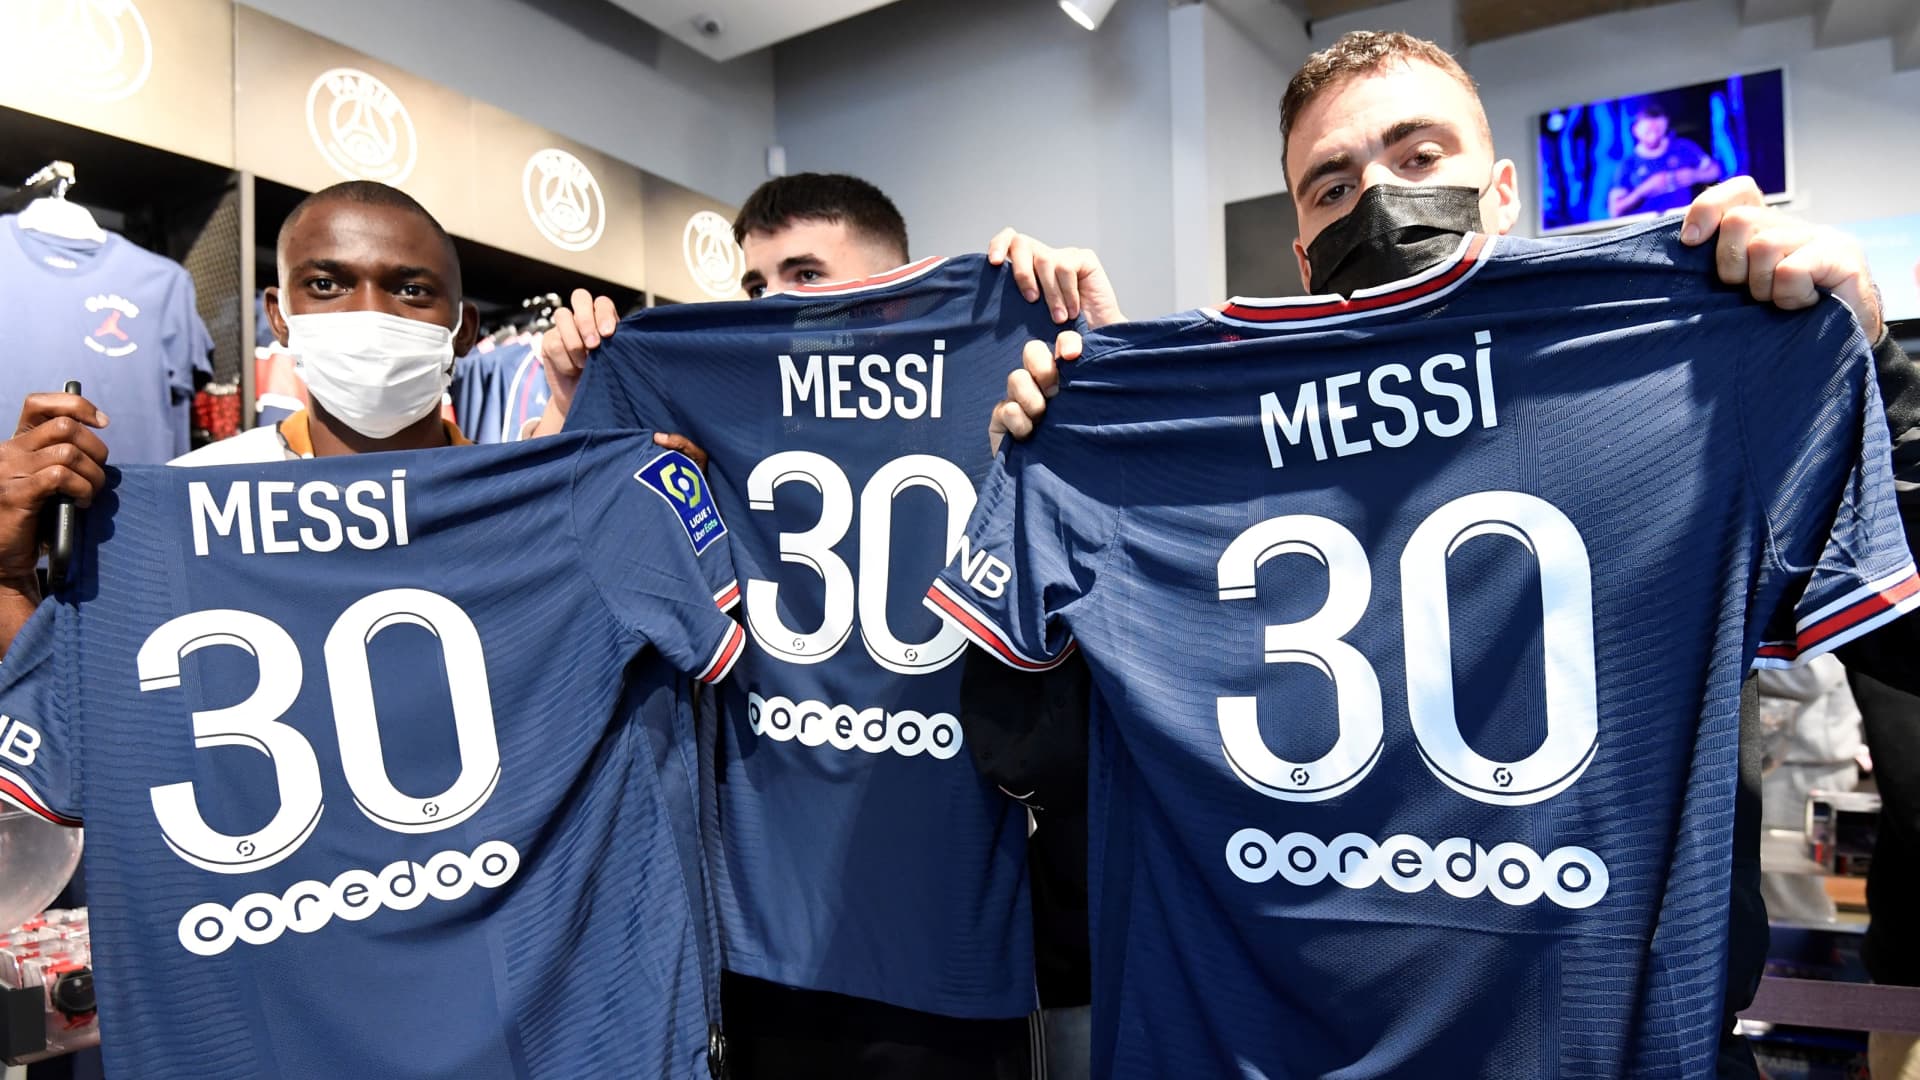 Supporters pose with jerseys of PSG's Argentinian football player Lionel Messi, that they have just bought at the Paris-Saint-Germain (PSG) football club store on the Champs Elysees avenue in Paris on August 11, 2021.